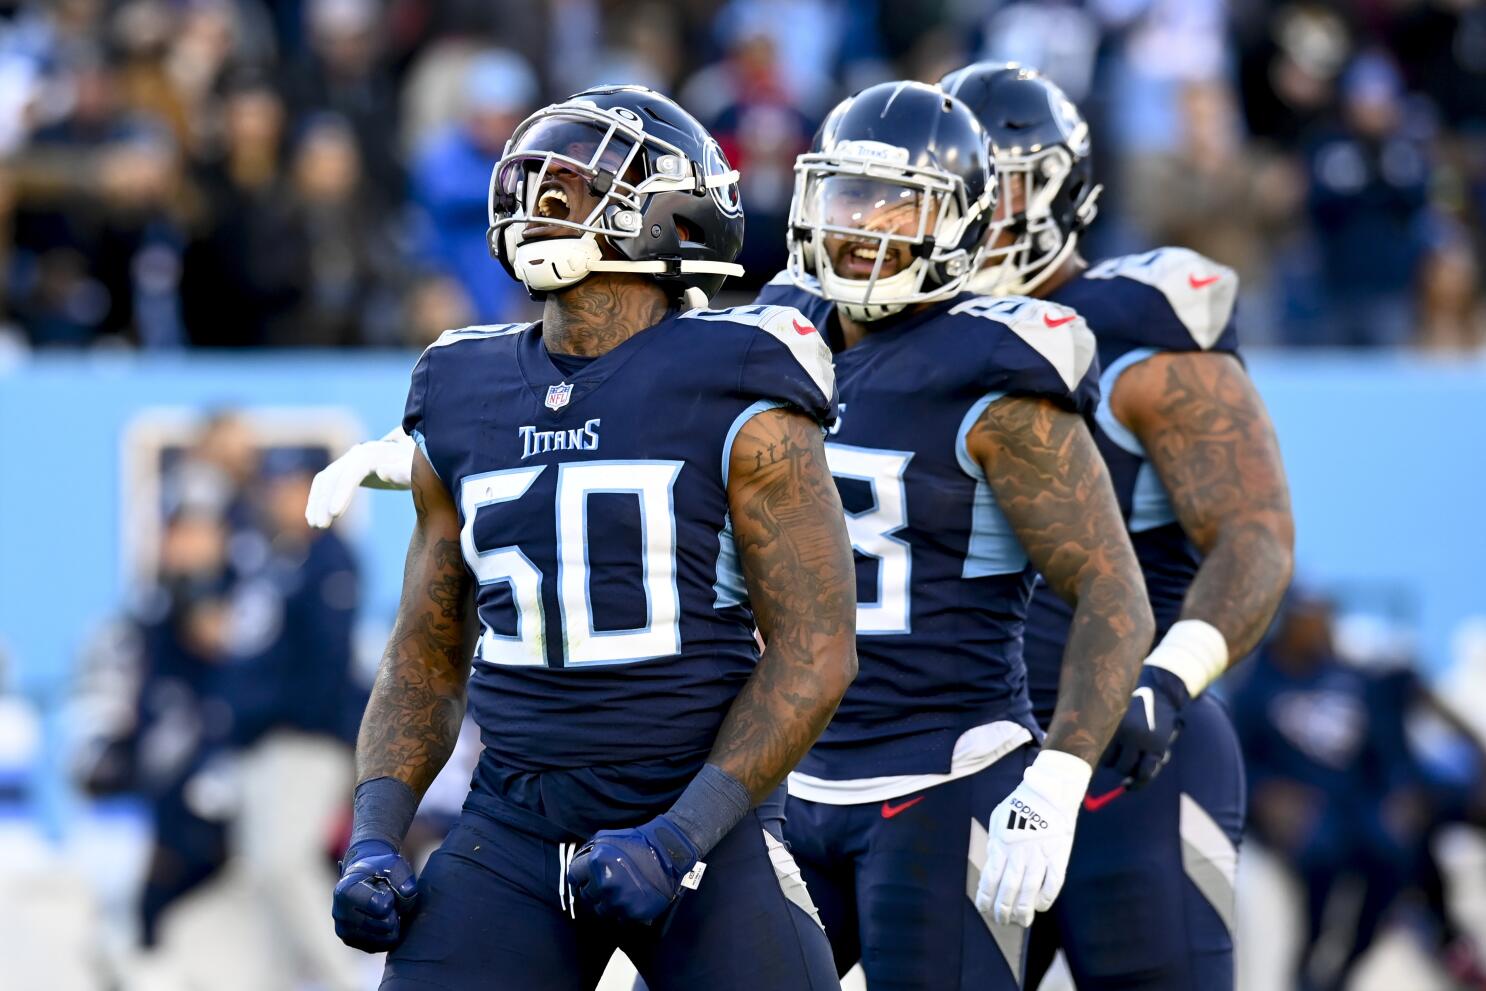 The readers deliver their submissions for the Titans' uniform